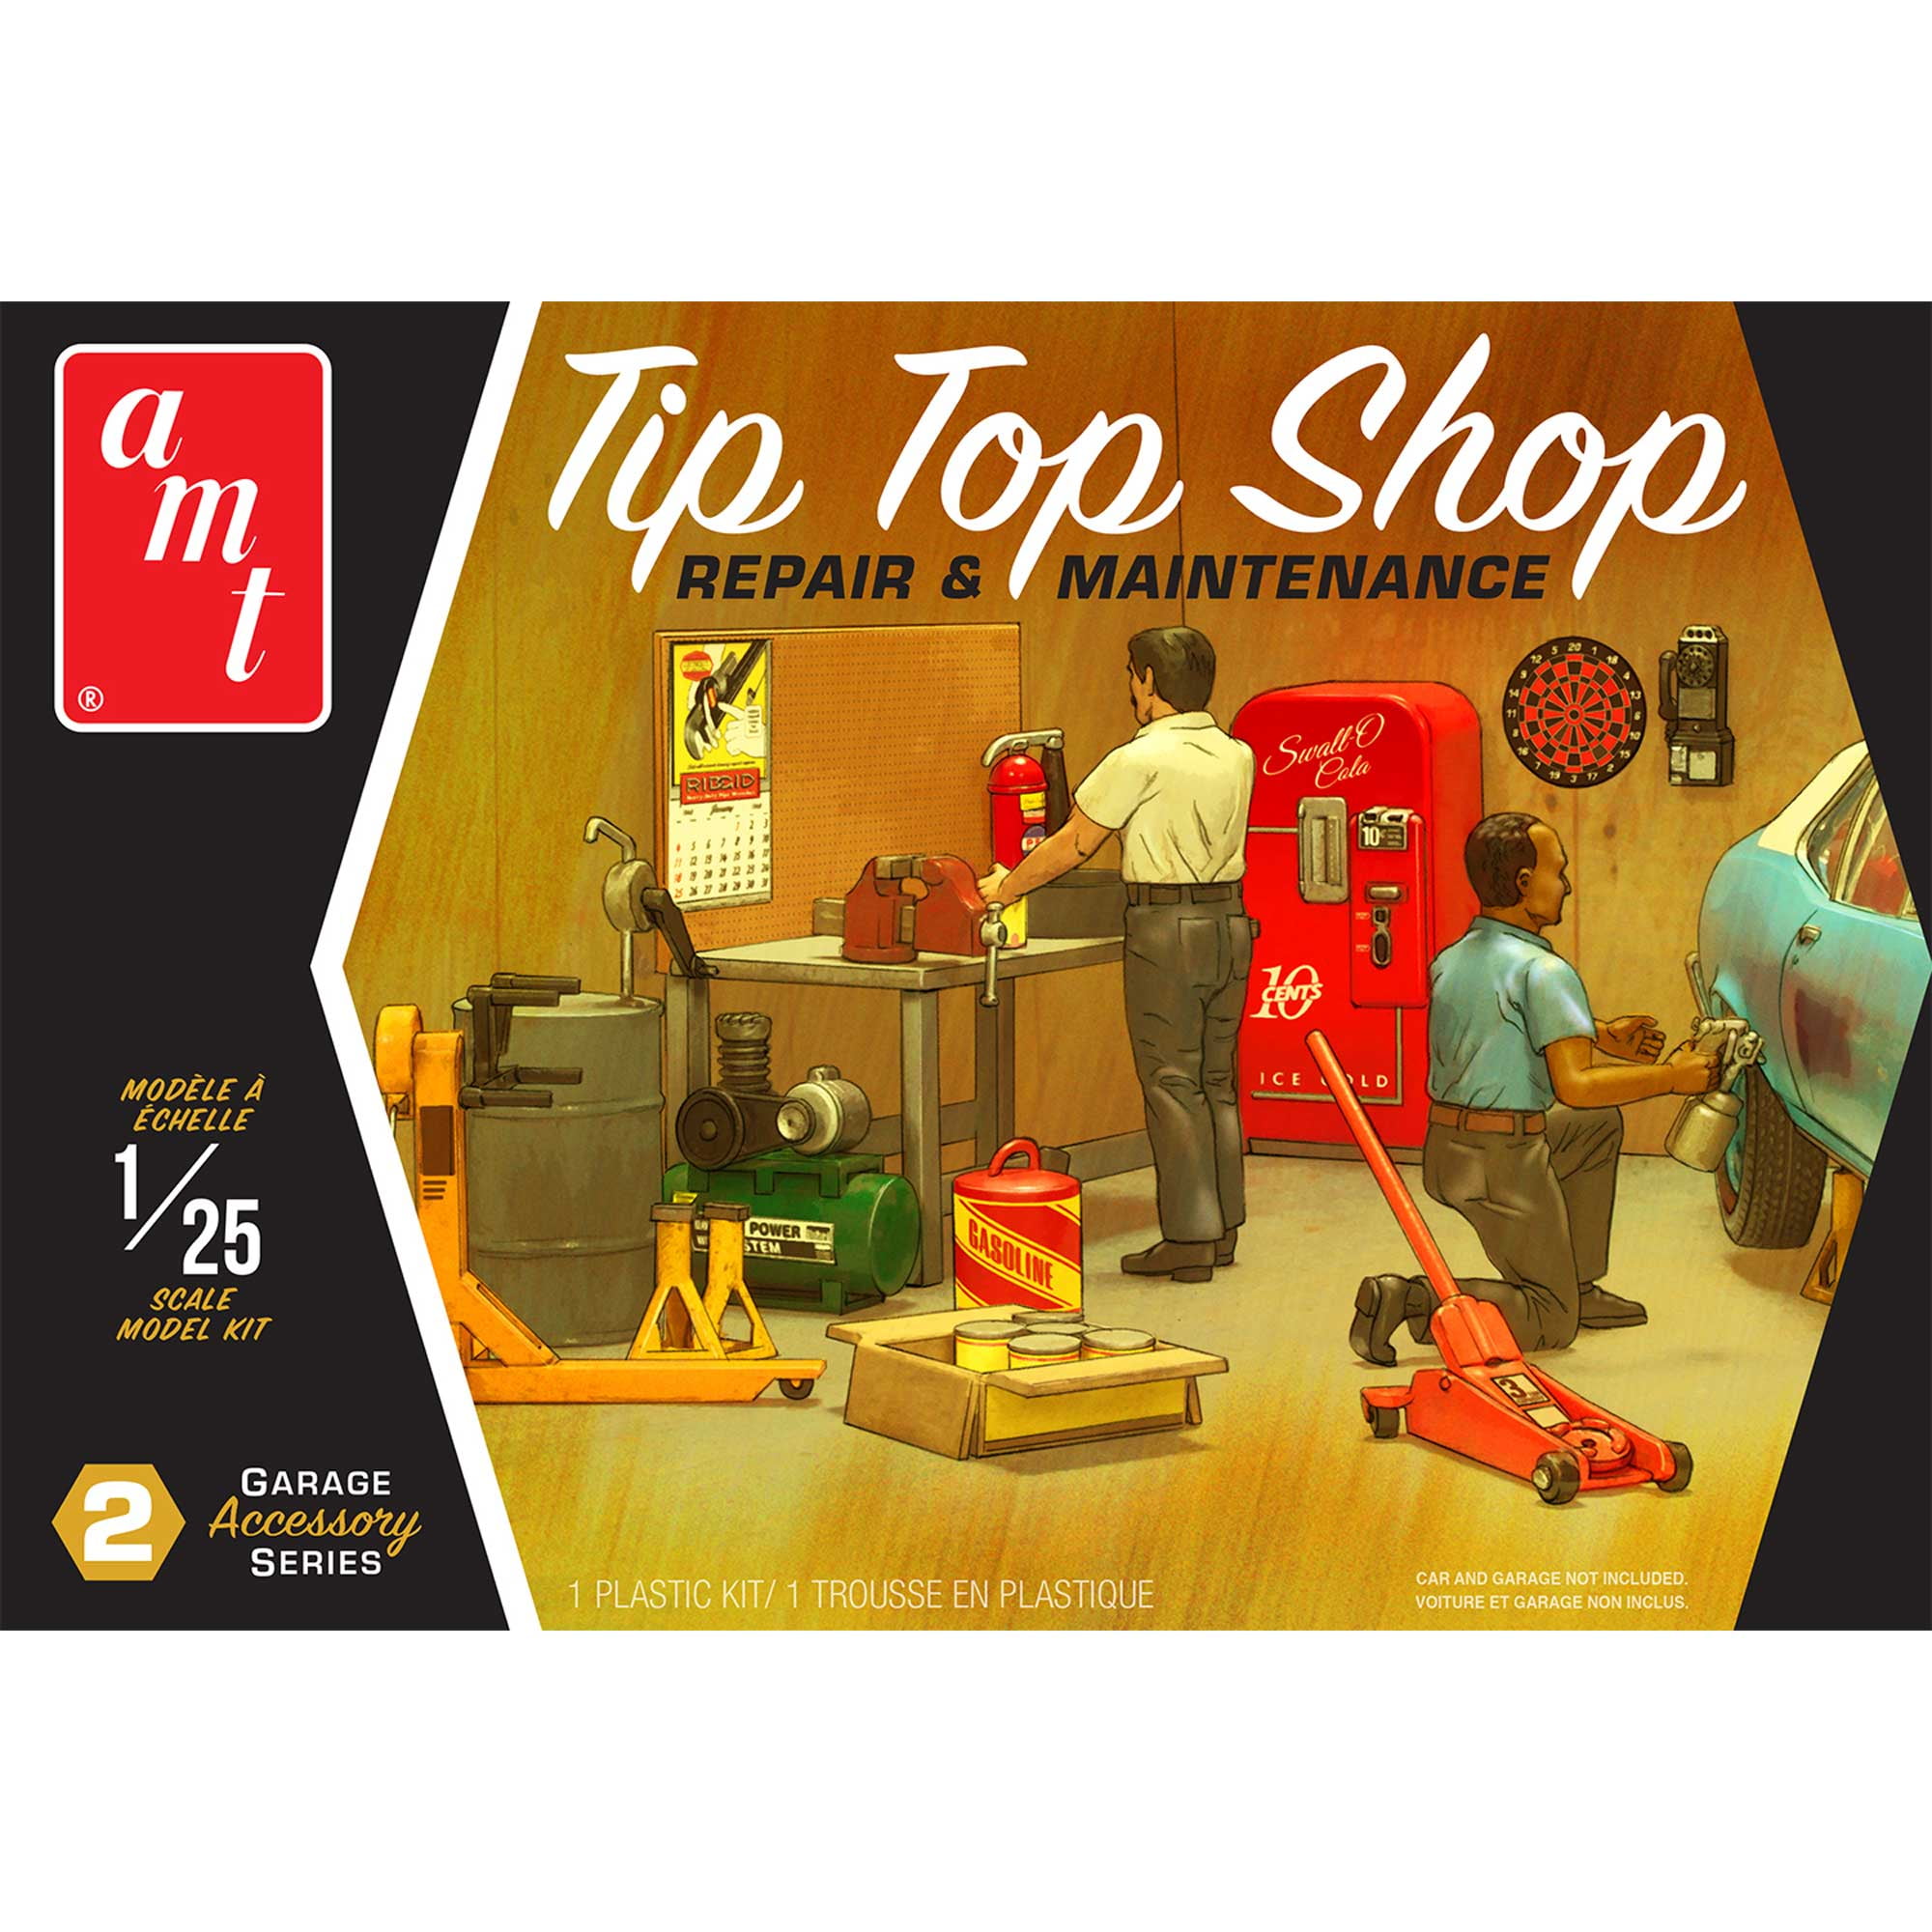 Picture of AMT AMTPP016M Garage Accessory Set No.2 Skill 2 Model Kit with 2 Figures Tip Top Shop 1 by 25 Scale Model Car